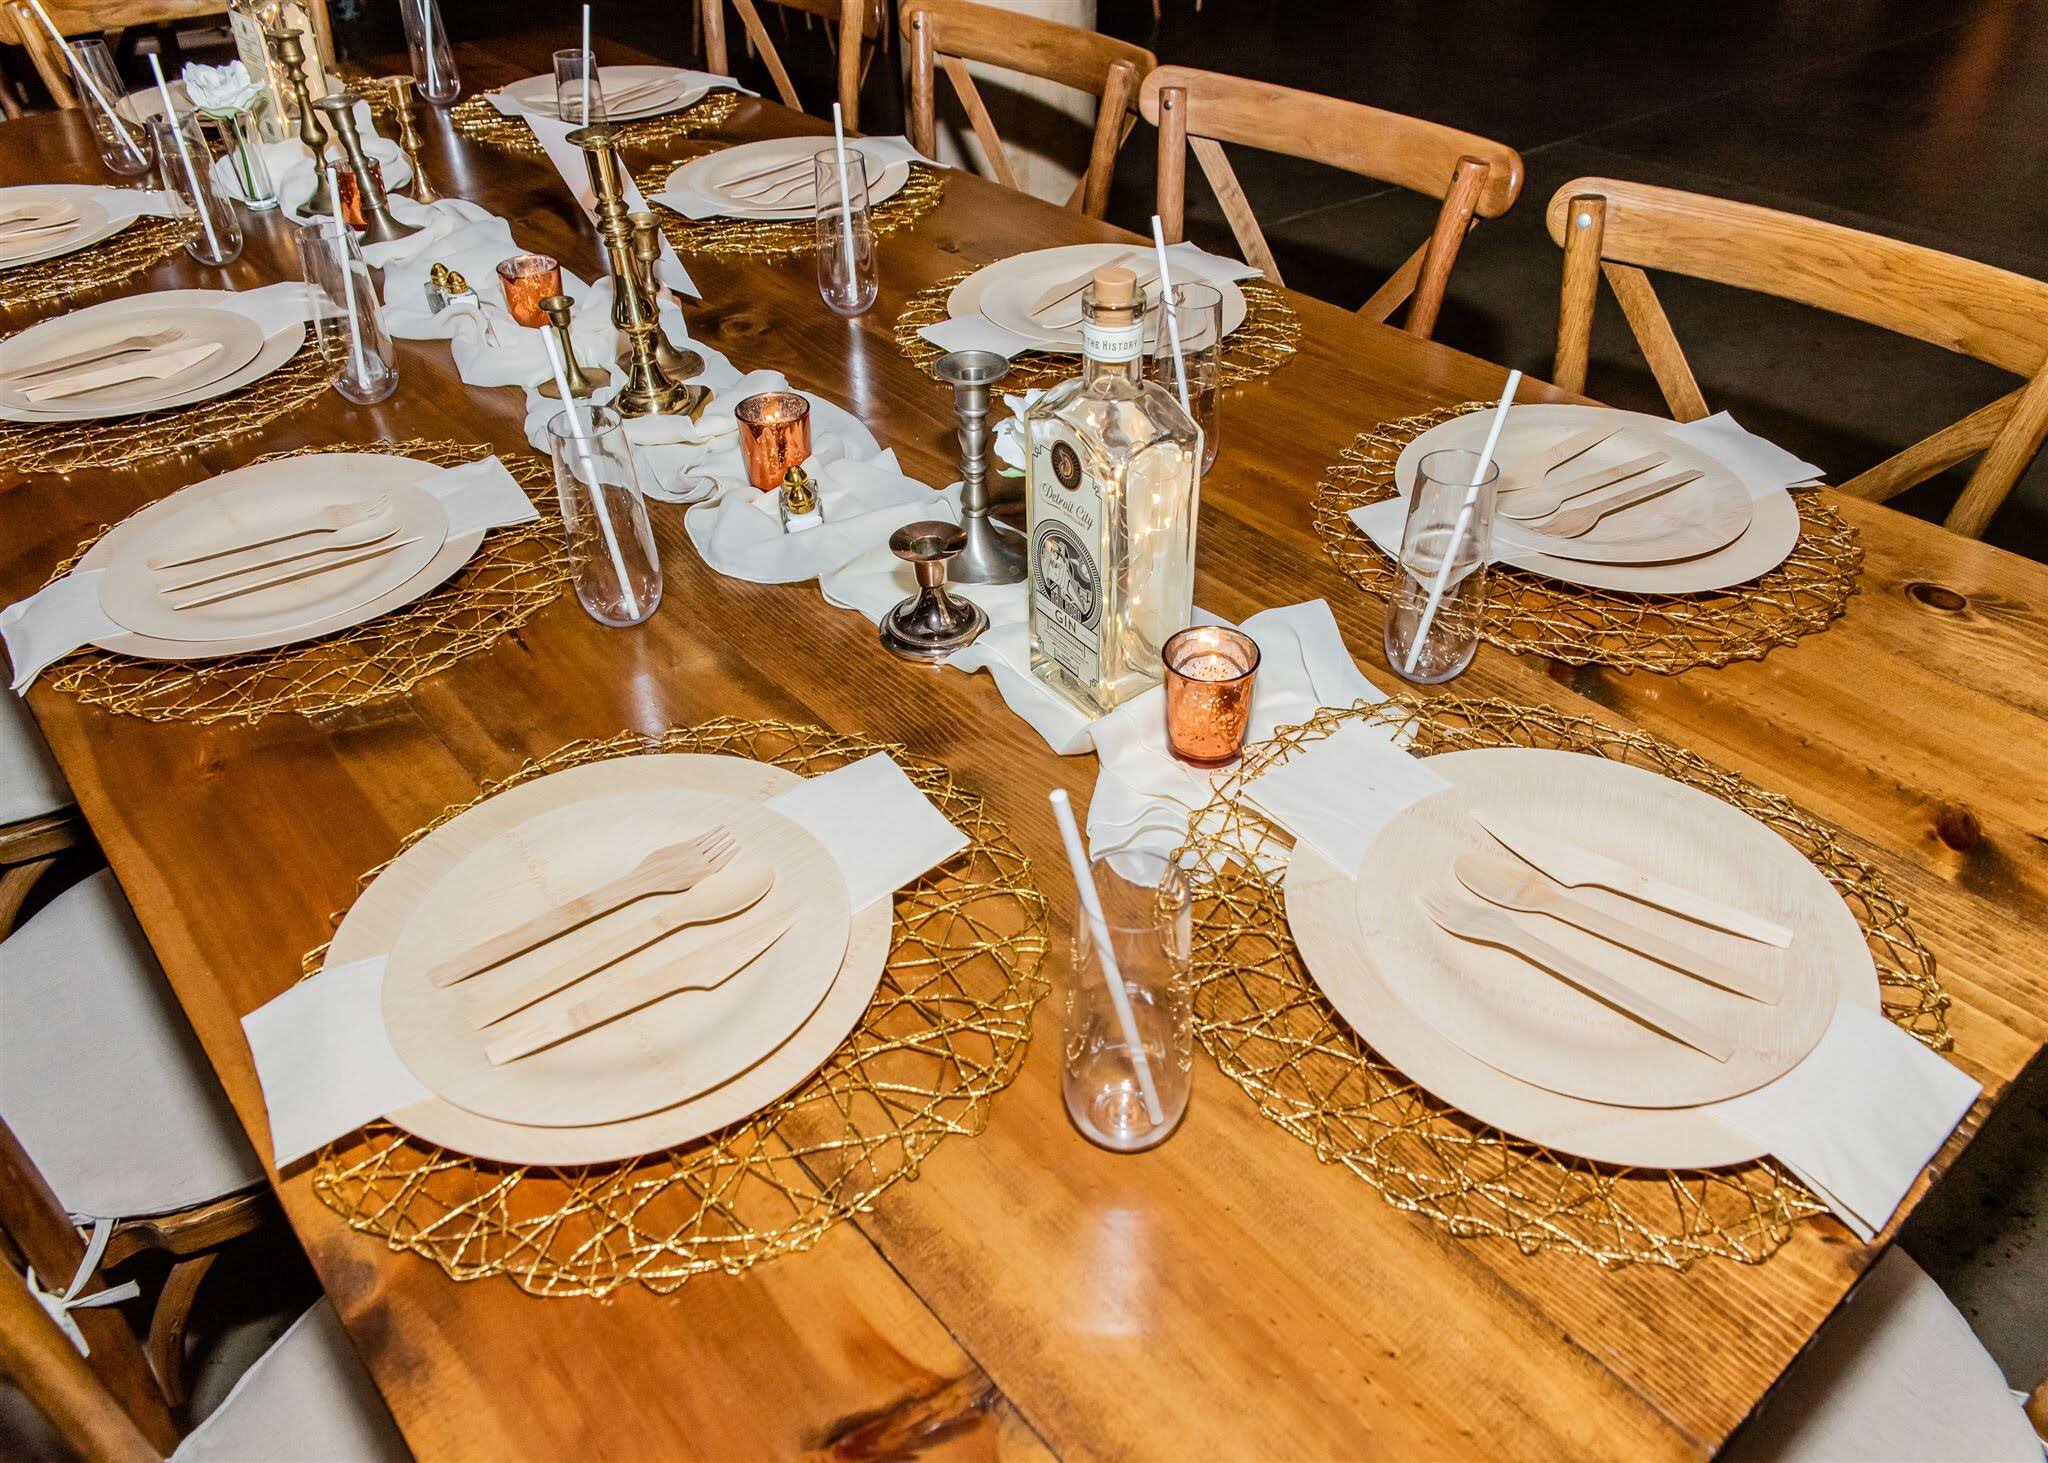 Metallic accents all day for the table decor.